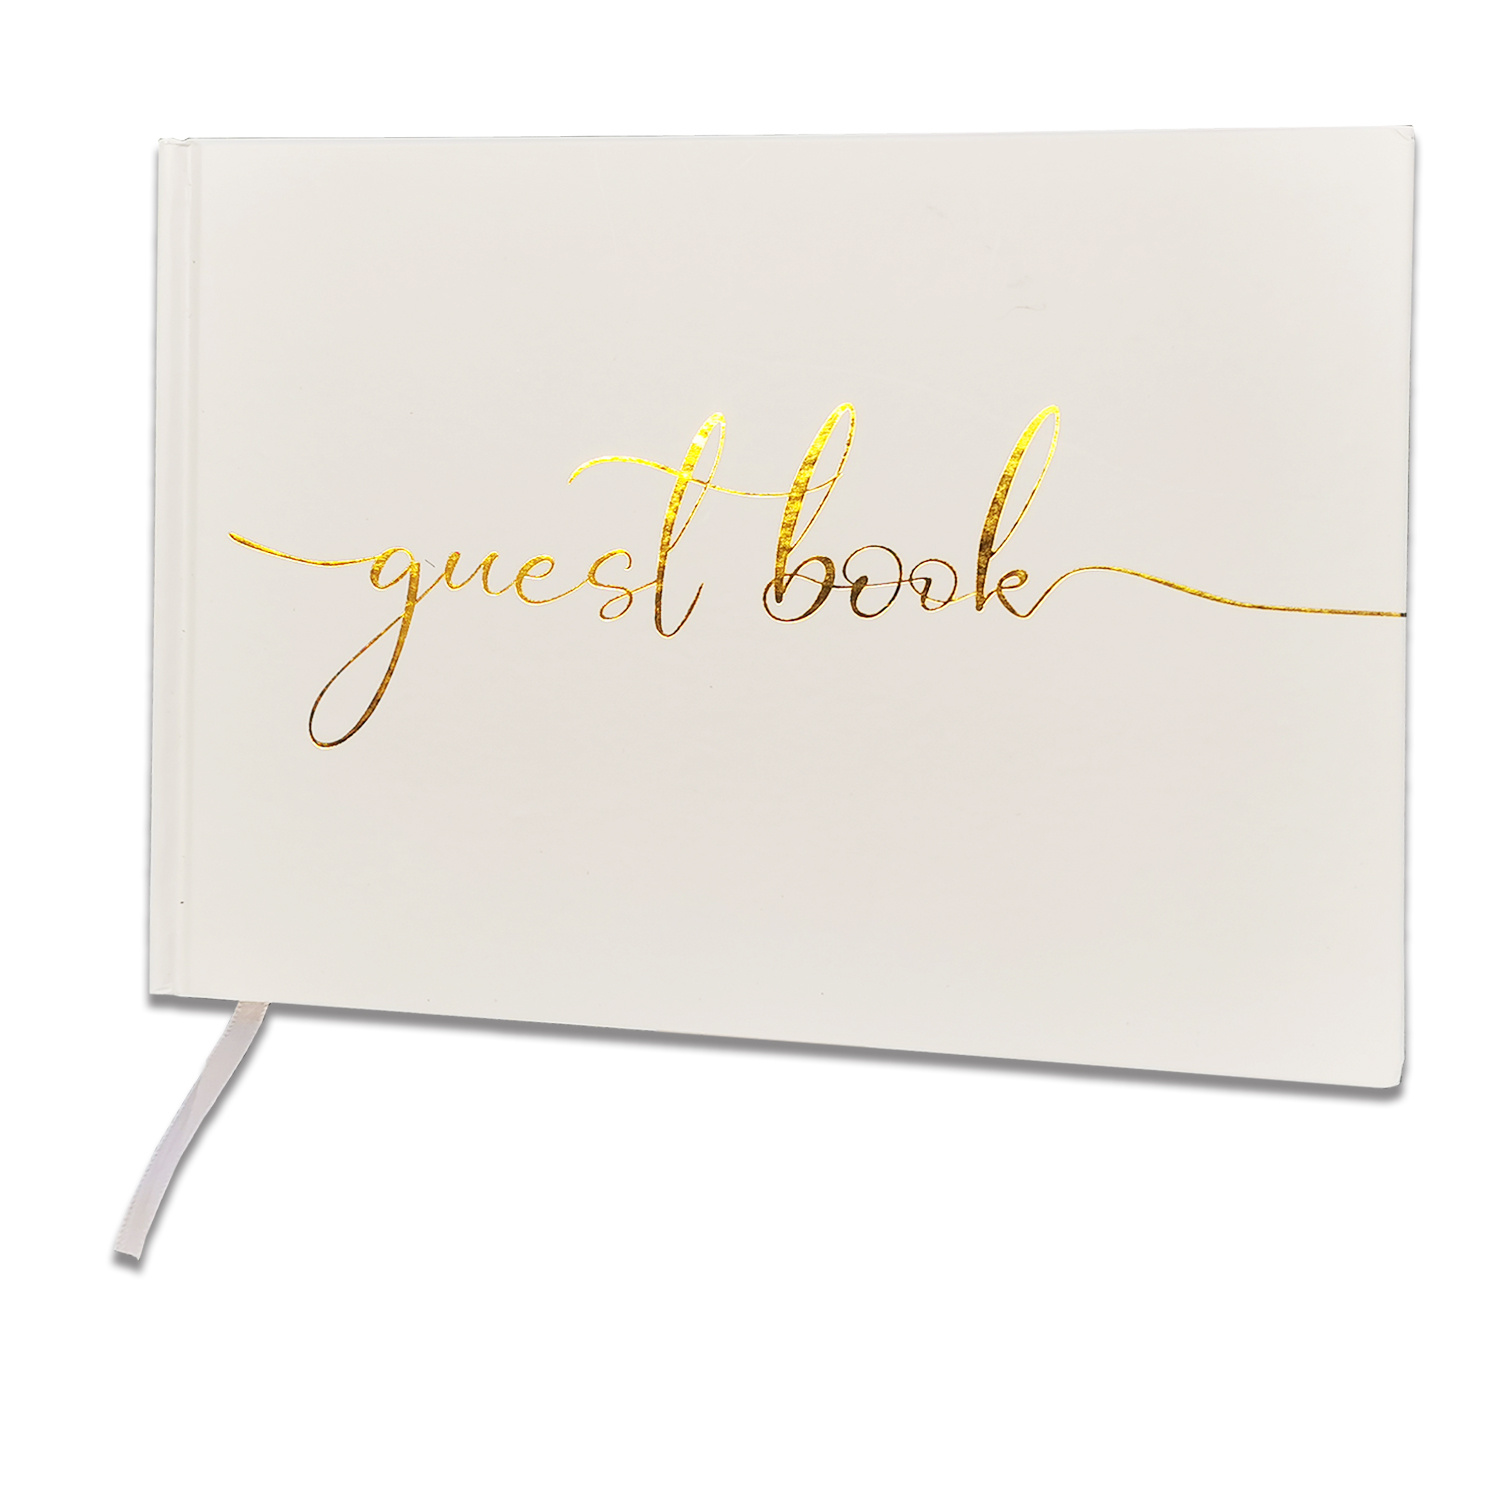 

200 Pages/100 Sheets Gold Lettering Guest Book - 9.65" X 7.28" Hardcover White Book - Foil Gold Lettering For Guests And Visitors To Sign At Weddings, Funerals Or Memorials, Parties Or Bridal Showers